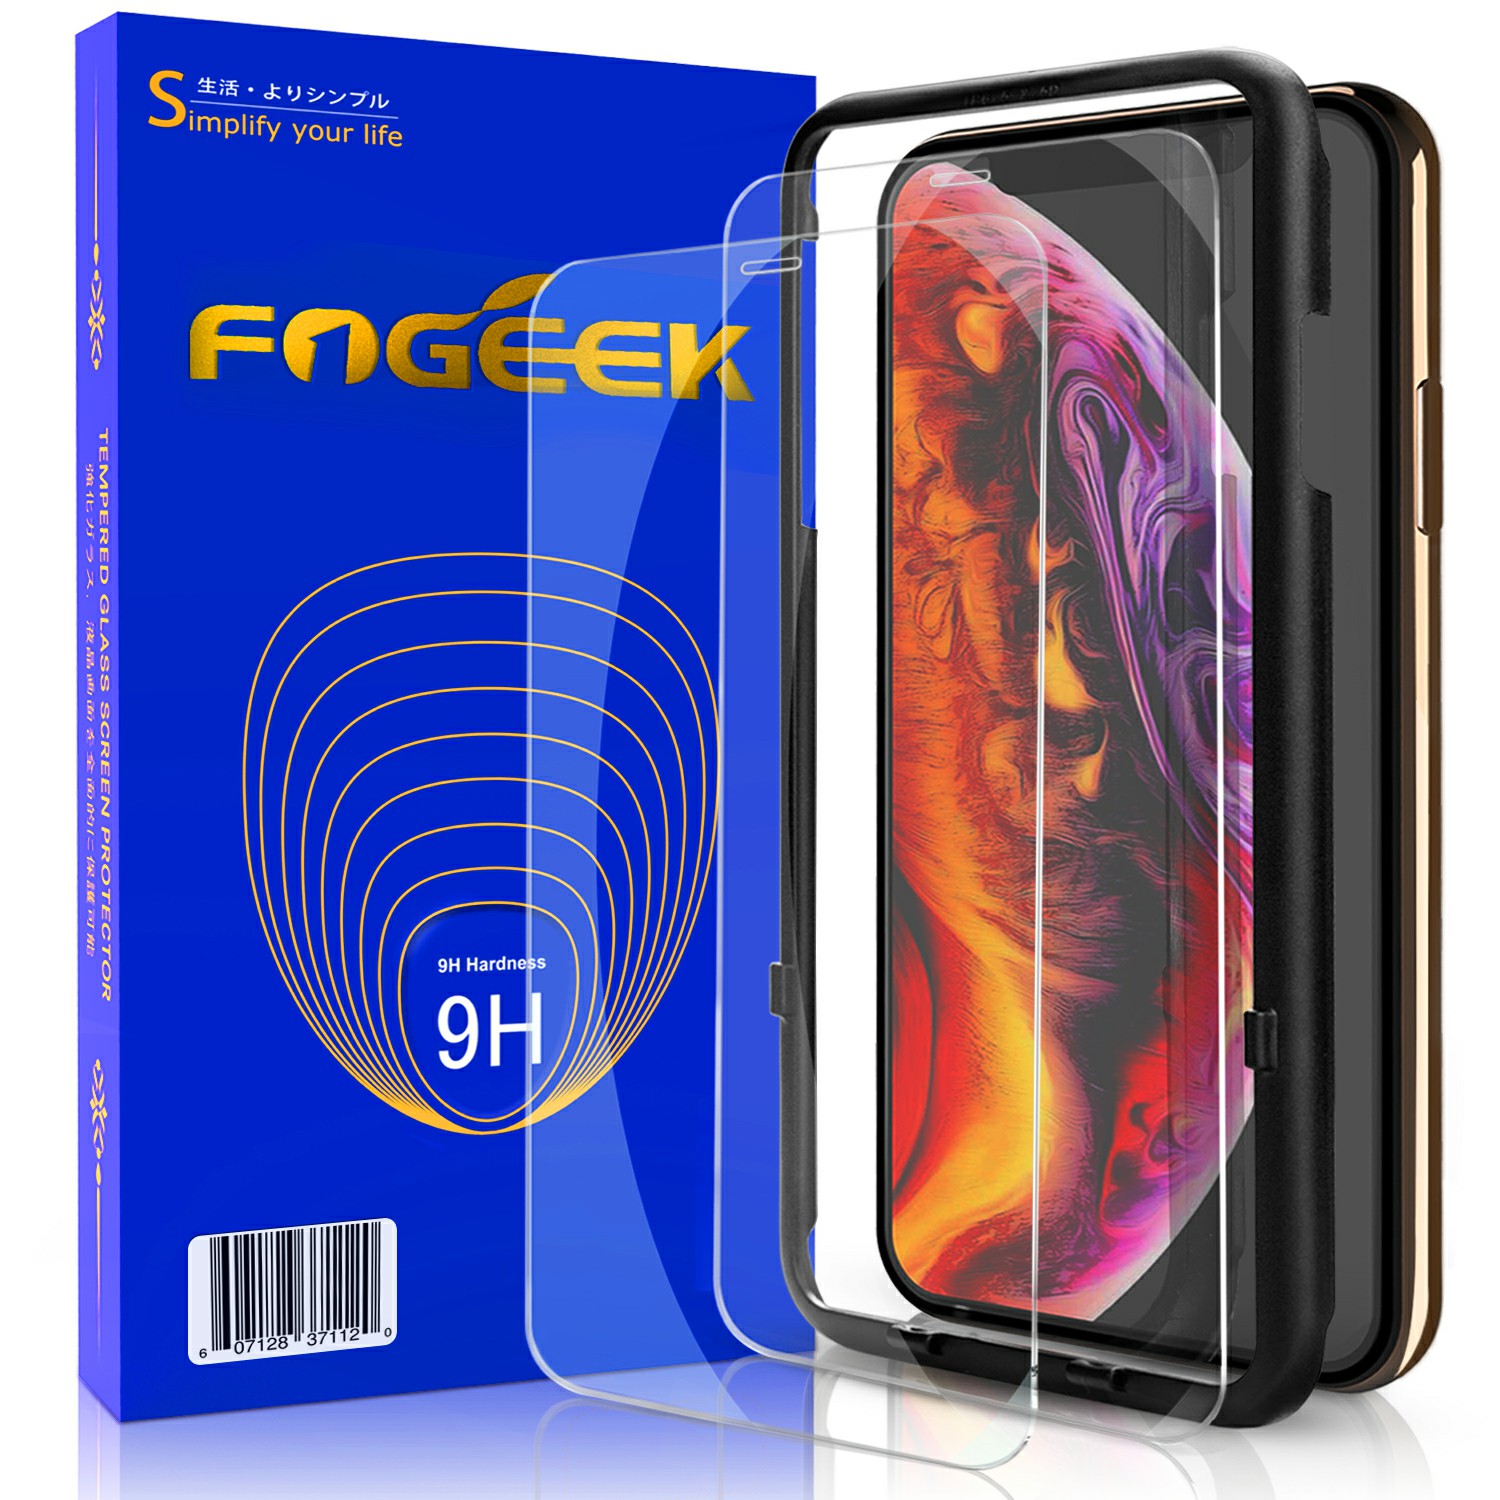 FOGEEK iPhone Xs Screen Protector,  9H Hardness No White Edge iPhone X Glass Screen Protector [Case Friendly],UPC 607128371120